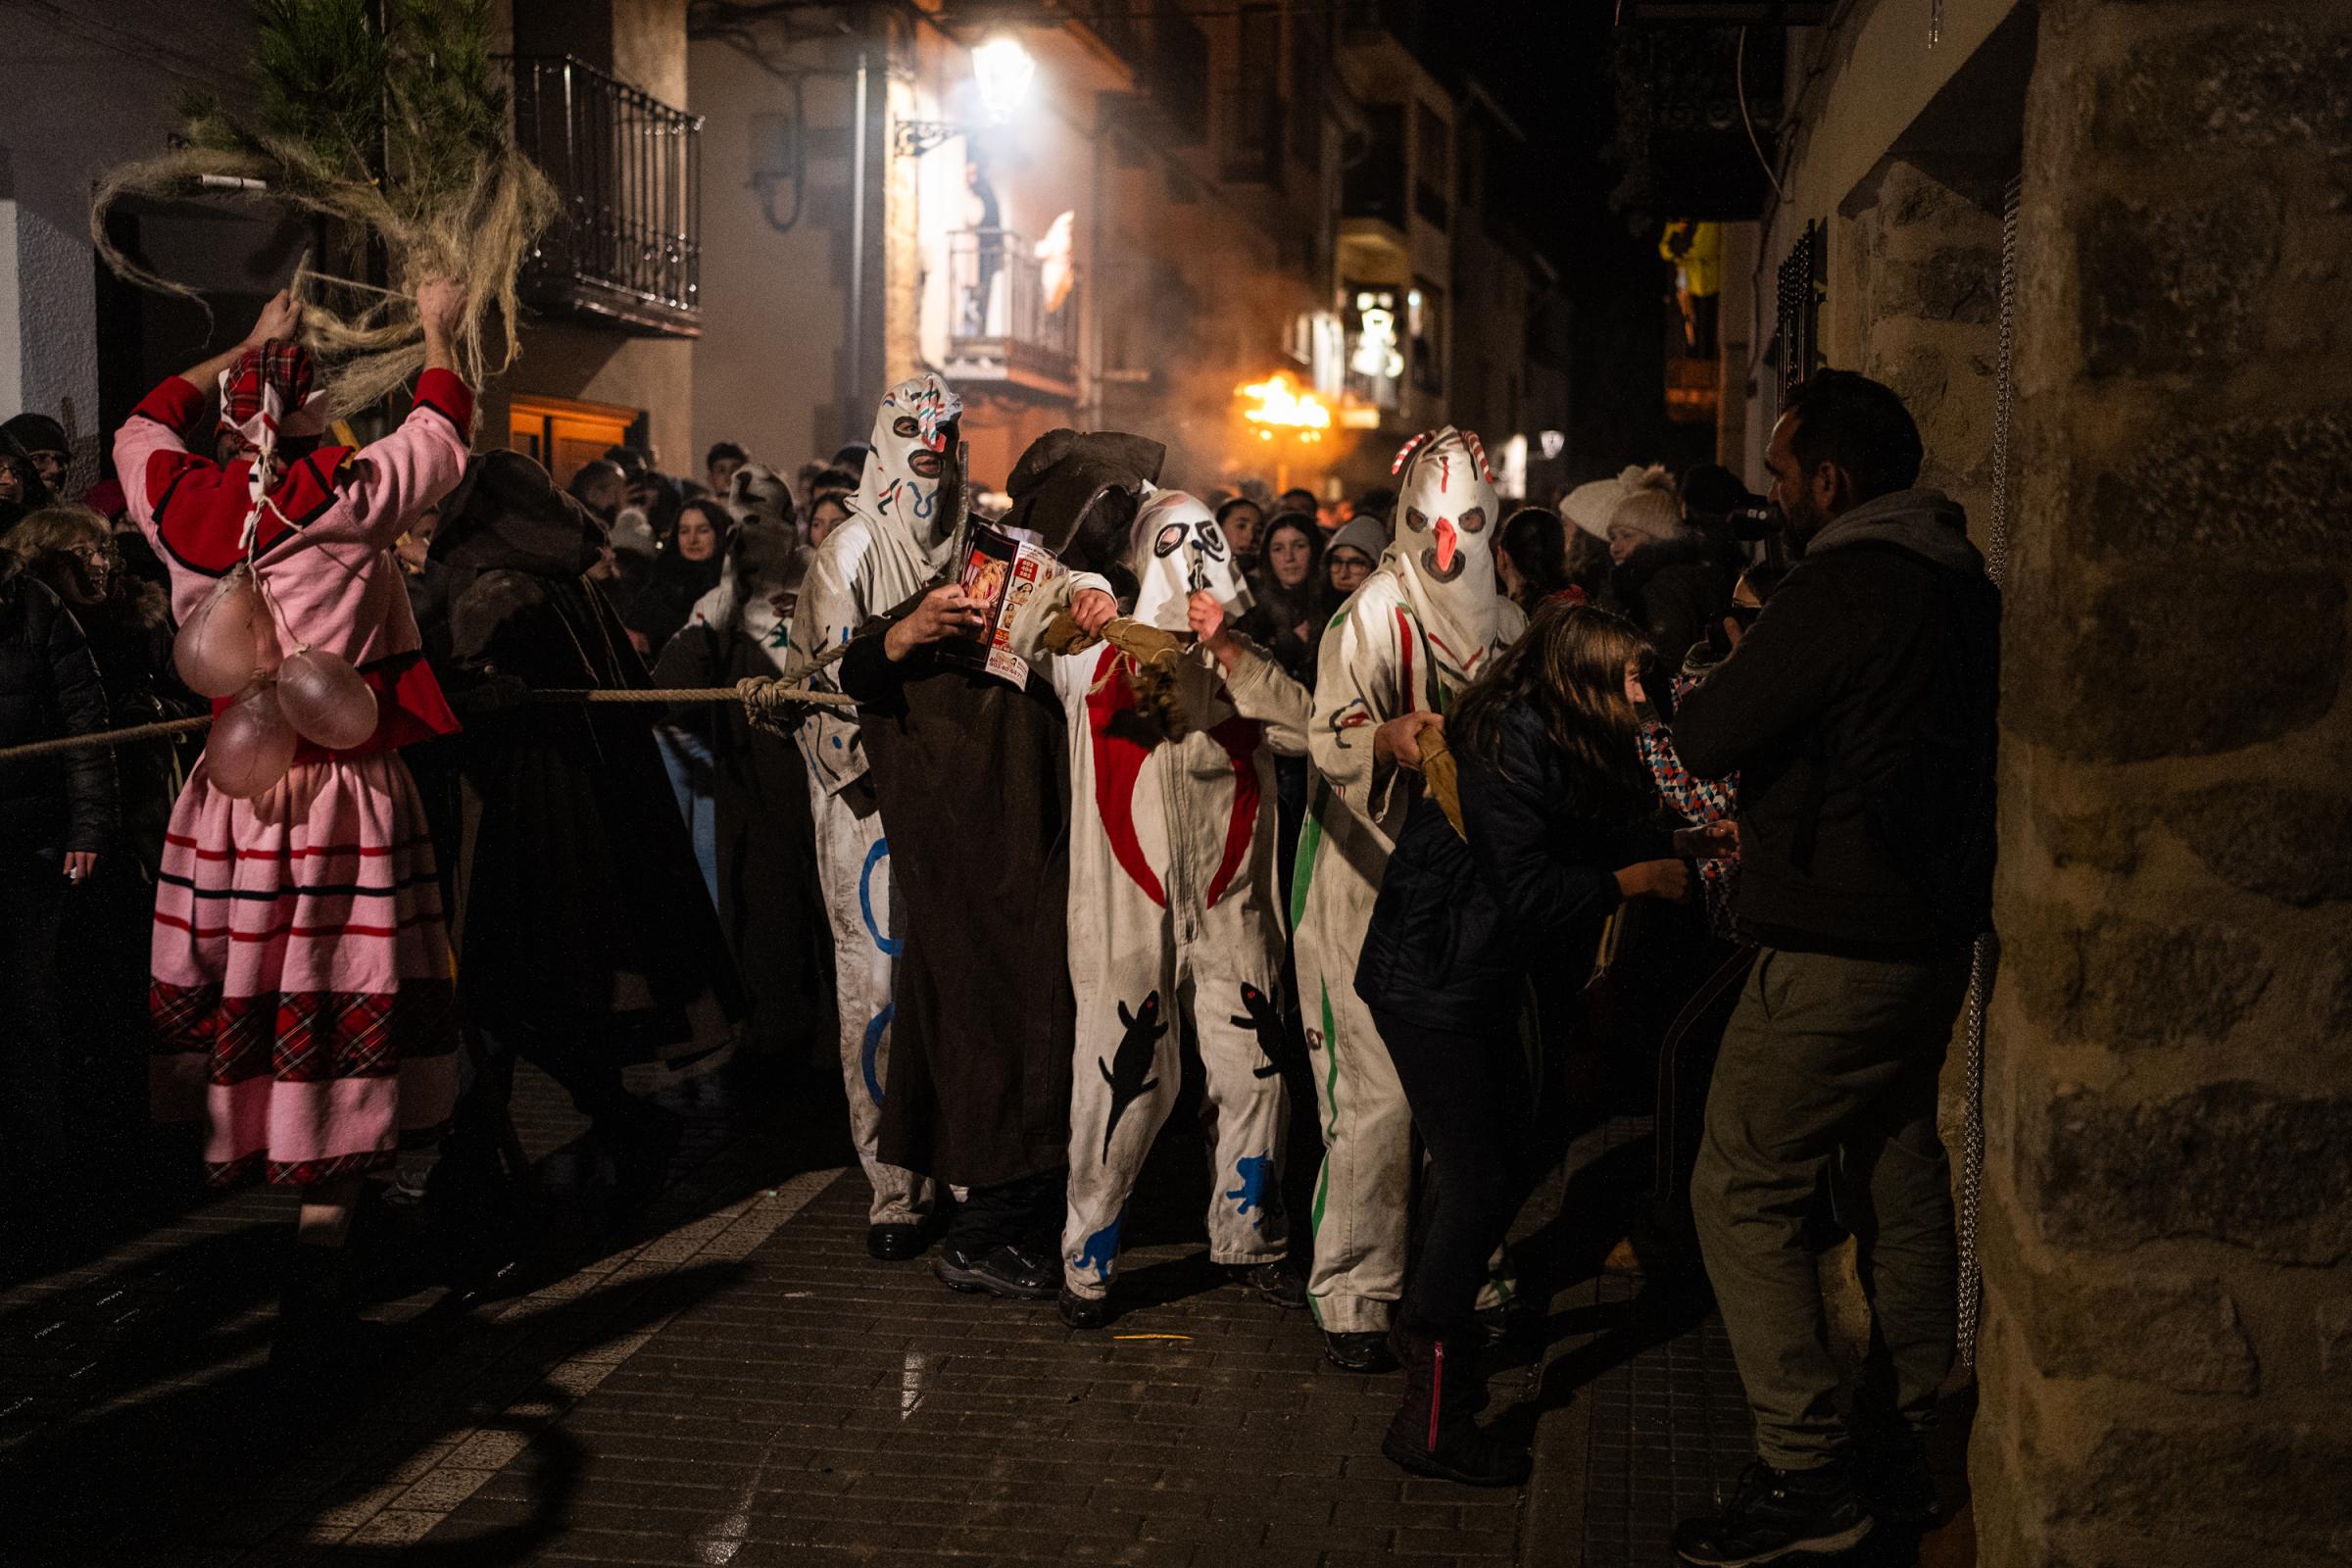 Spanish Villagers Celebrate The Santantona de Forcall, A Medieval Fire Festival - FORCALL, SPAIN - JANUARY 19: The participants of the...